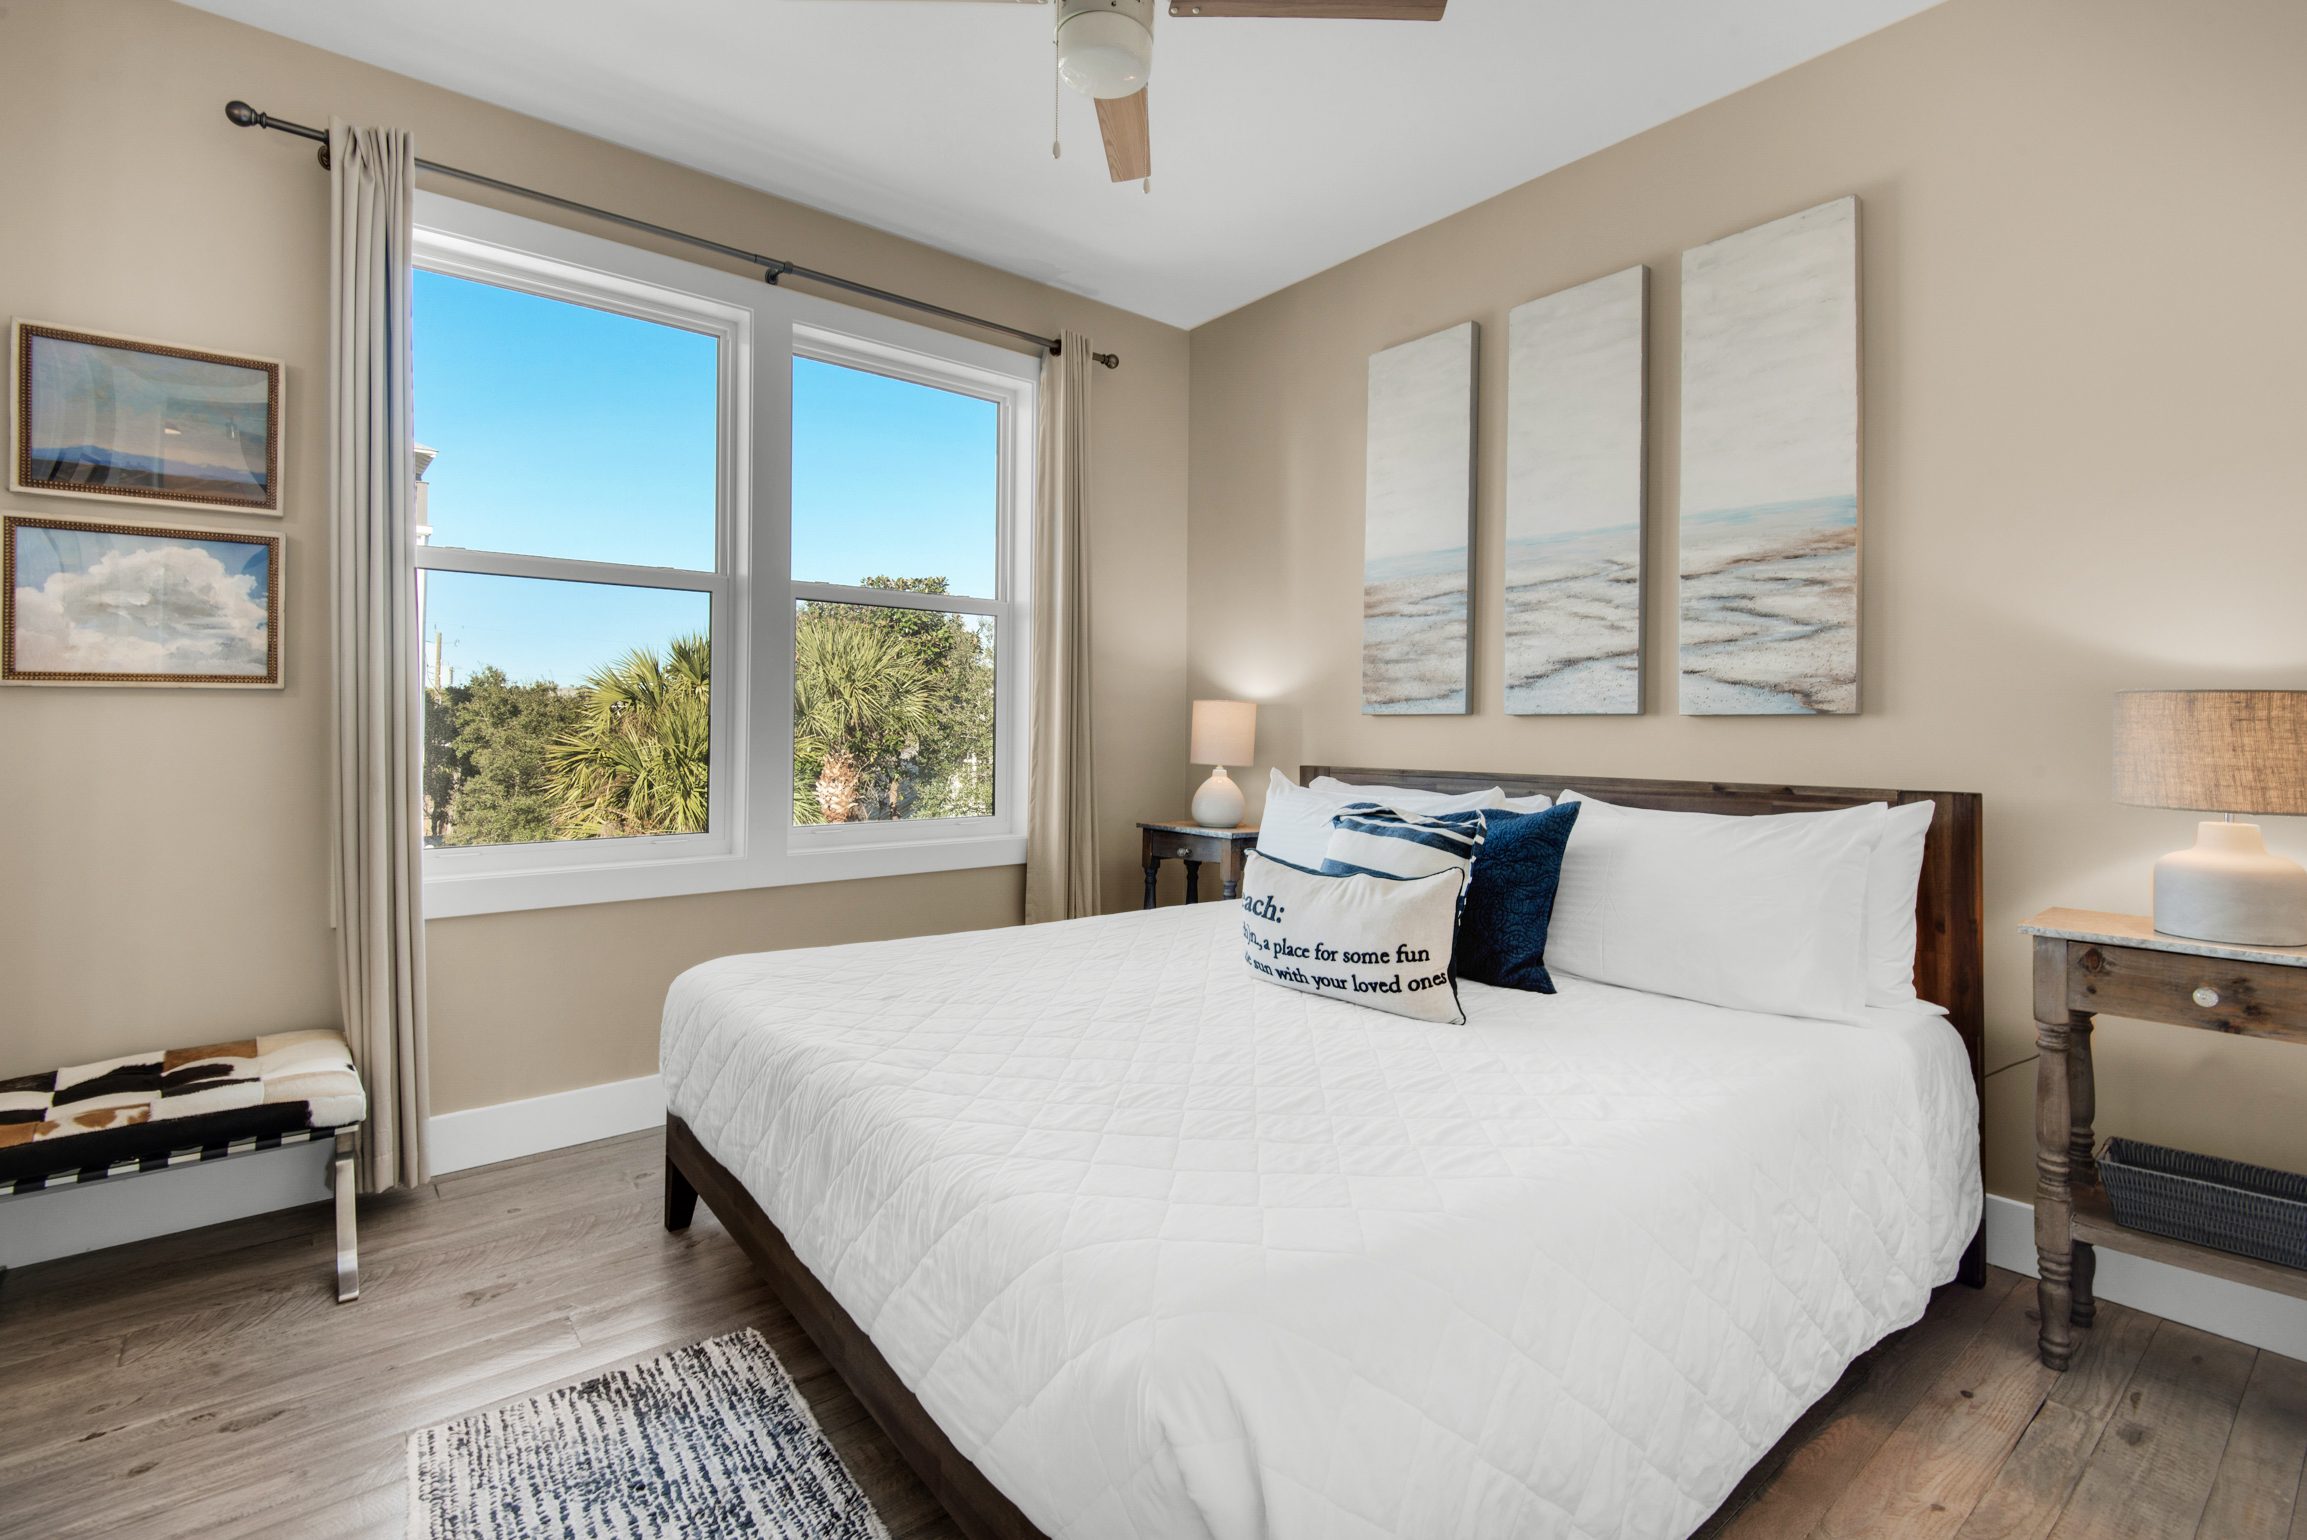 Guest bedroom with amazing views